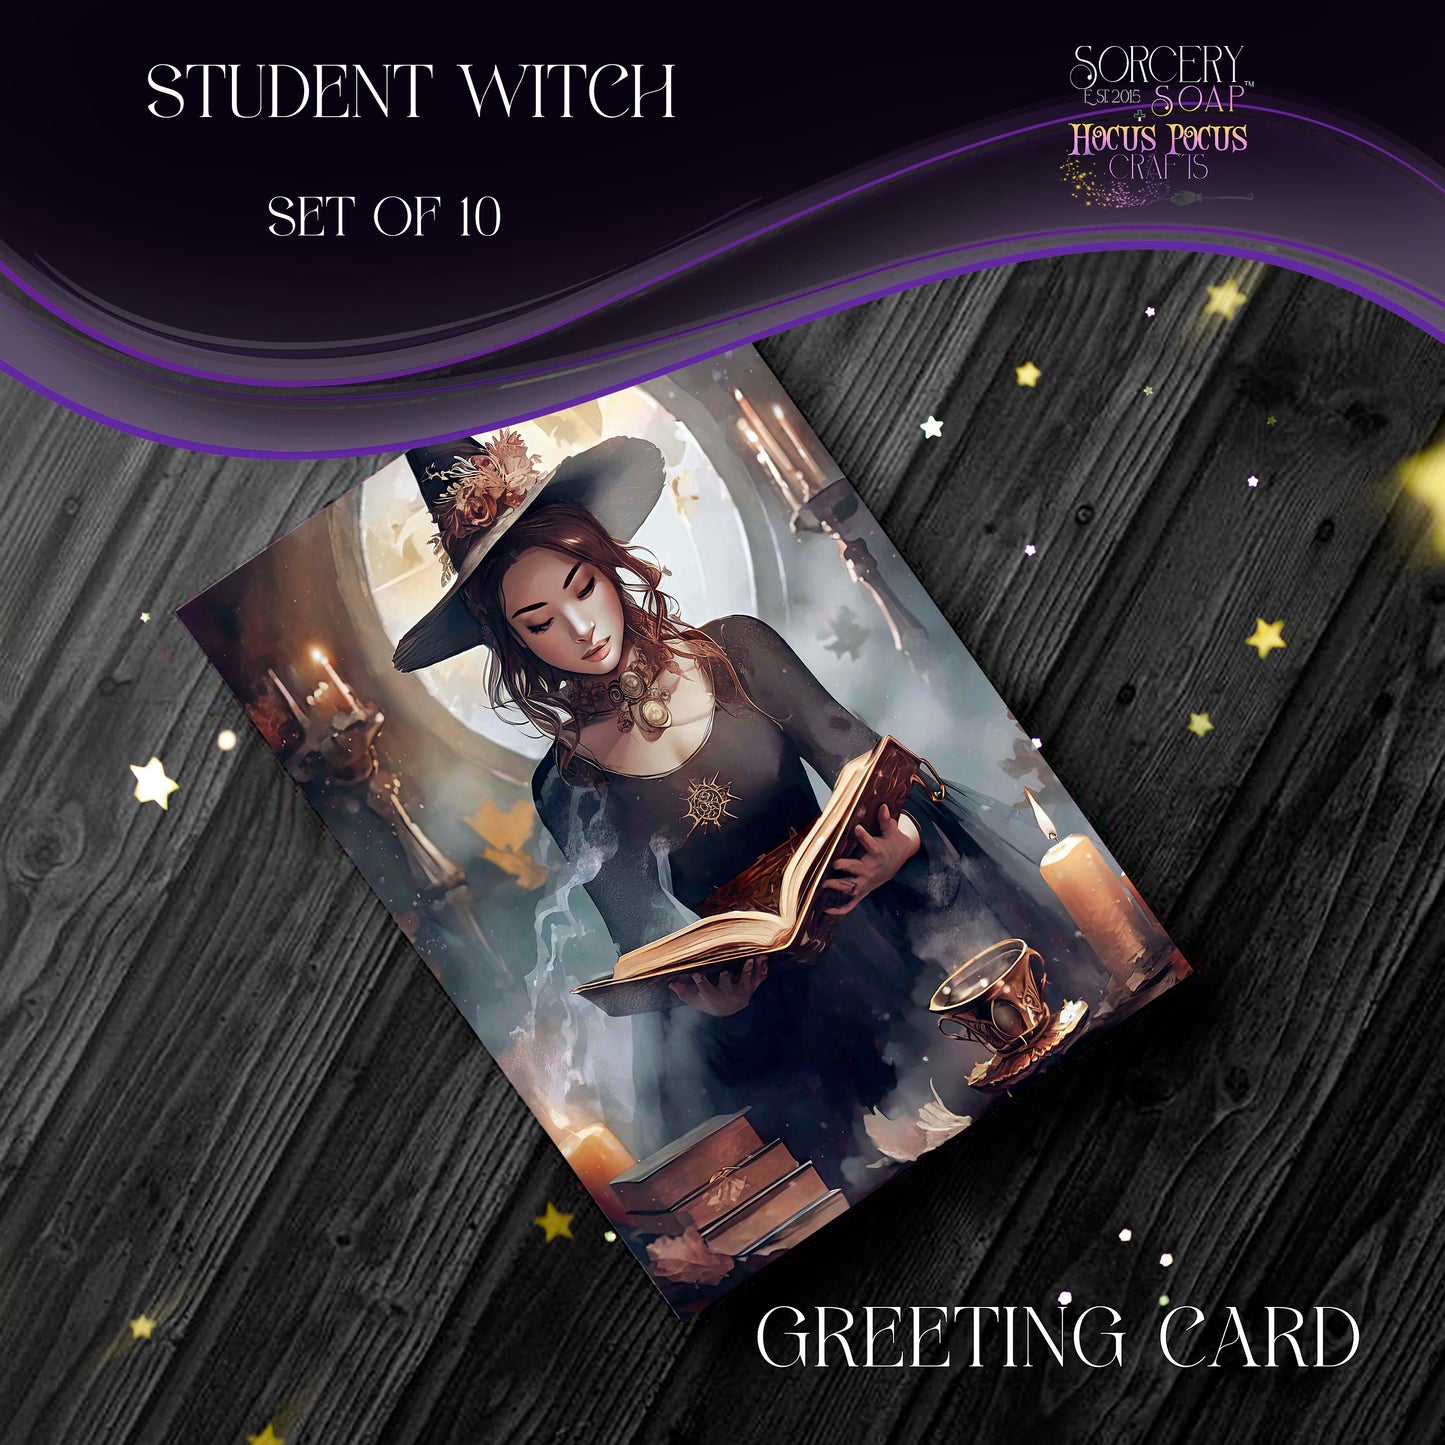 Student Witch Greeting Card